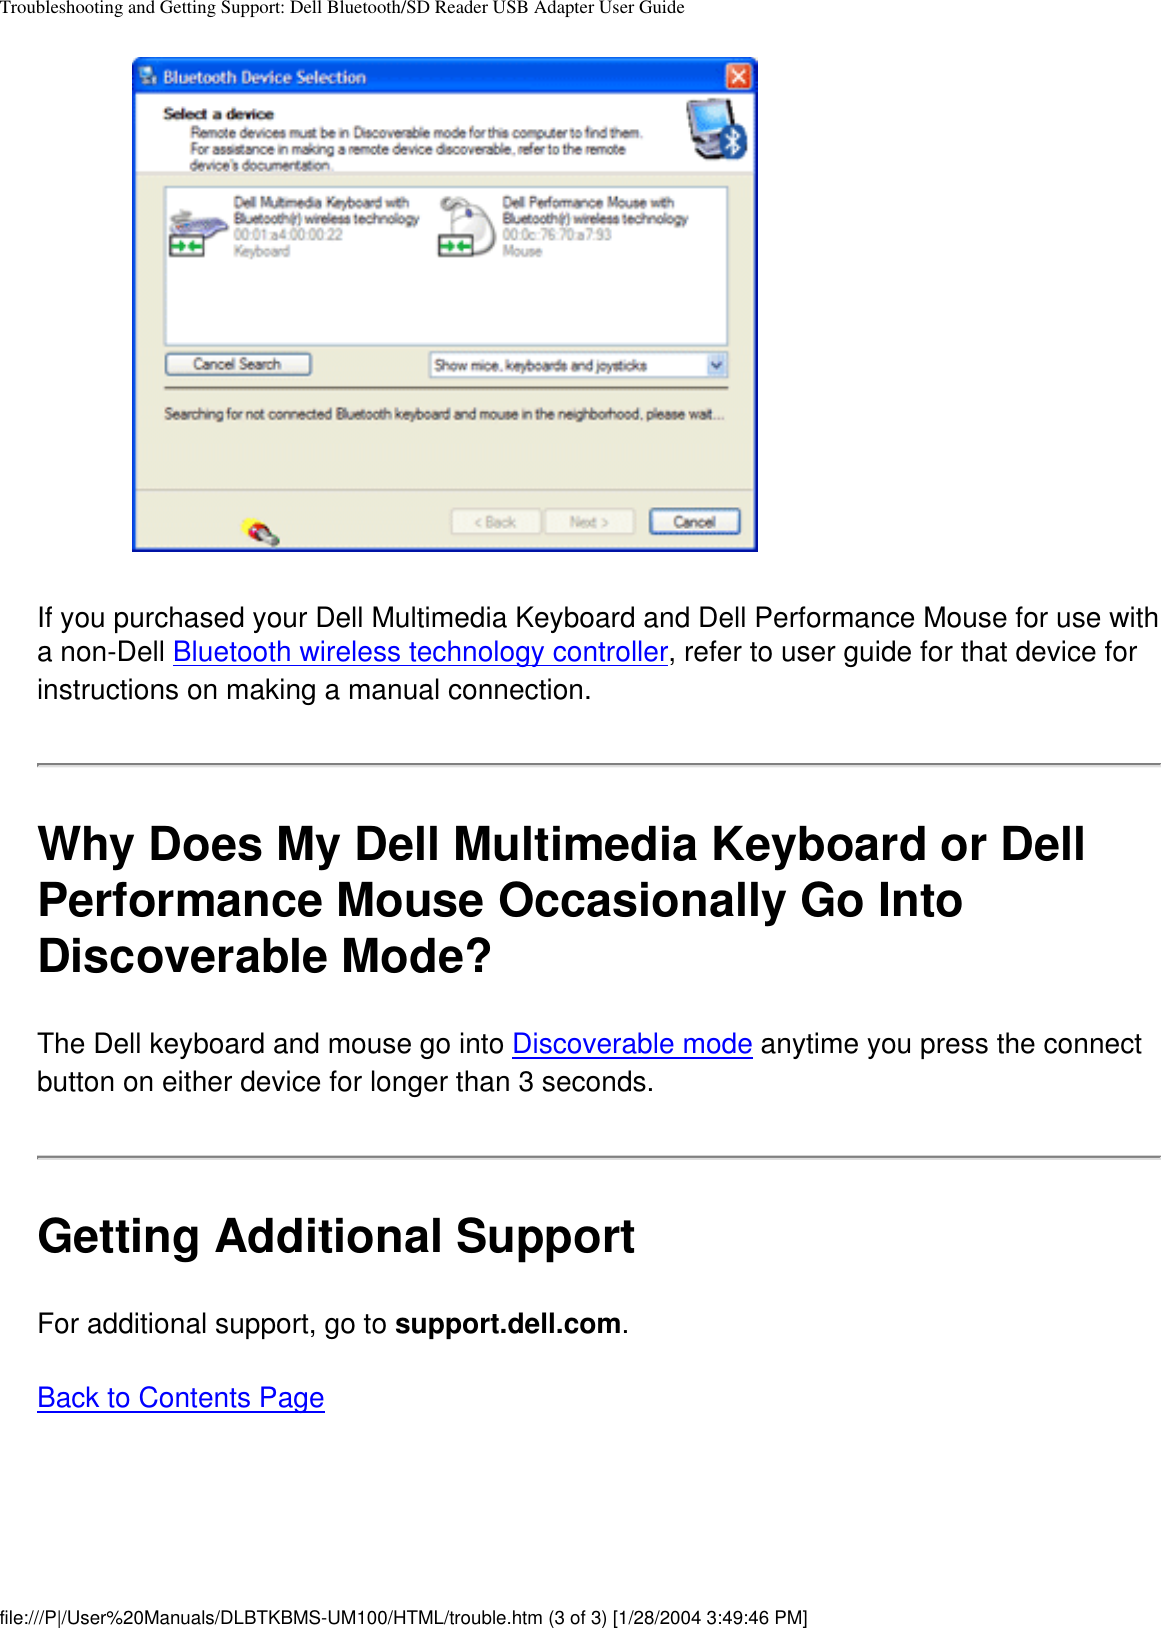 Troubleshooting and Getting Support: Dell Bluetooth/SD Reader USB Adapter User GuideIf you purchased your Dell Multimedia Keyboard and Dell Performance Mouse for use with a non-Dell Bluetooth wireless technology controller, refer to user guide for that device for instructions on making a manual connection.Why Does My Dell Multimedia Keyboard or Dell Performance Mouse Occasionally Go Into Discoverable Mode?The Dell keyboard and mouse go into Discoverable mode anytime you press the connect button on either device for longer than 3 seconds. Getting Additional SupportFor additional support, go to support.dell.com.Back to Contents Pagefile:///P|/User%20Manuals/DLBTKBMS-UM100/HTML/trouble.htm (3 of 3) [1/28/2004 3:49:46 PM]